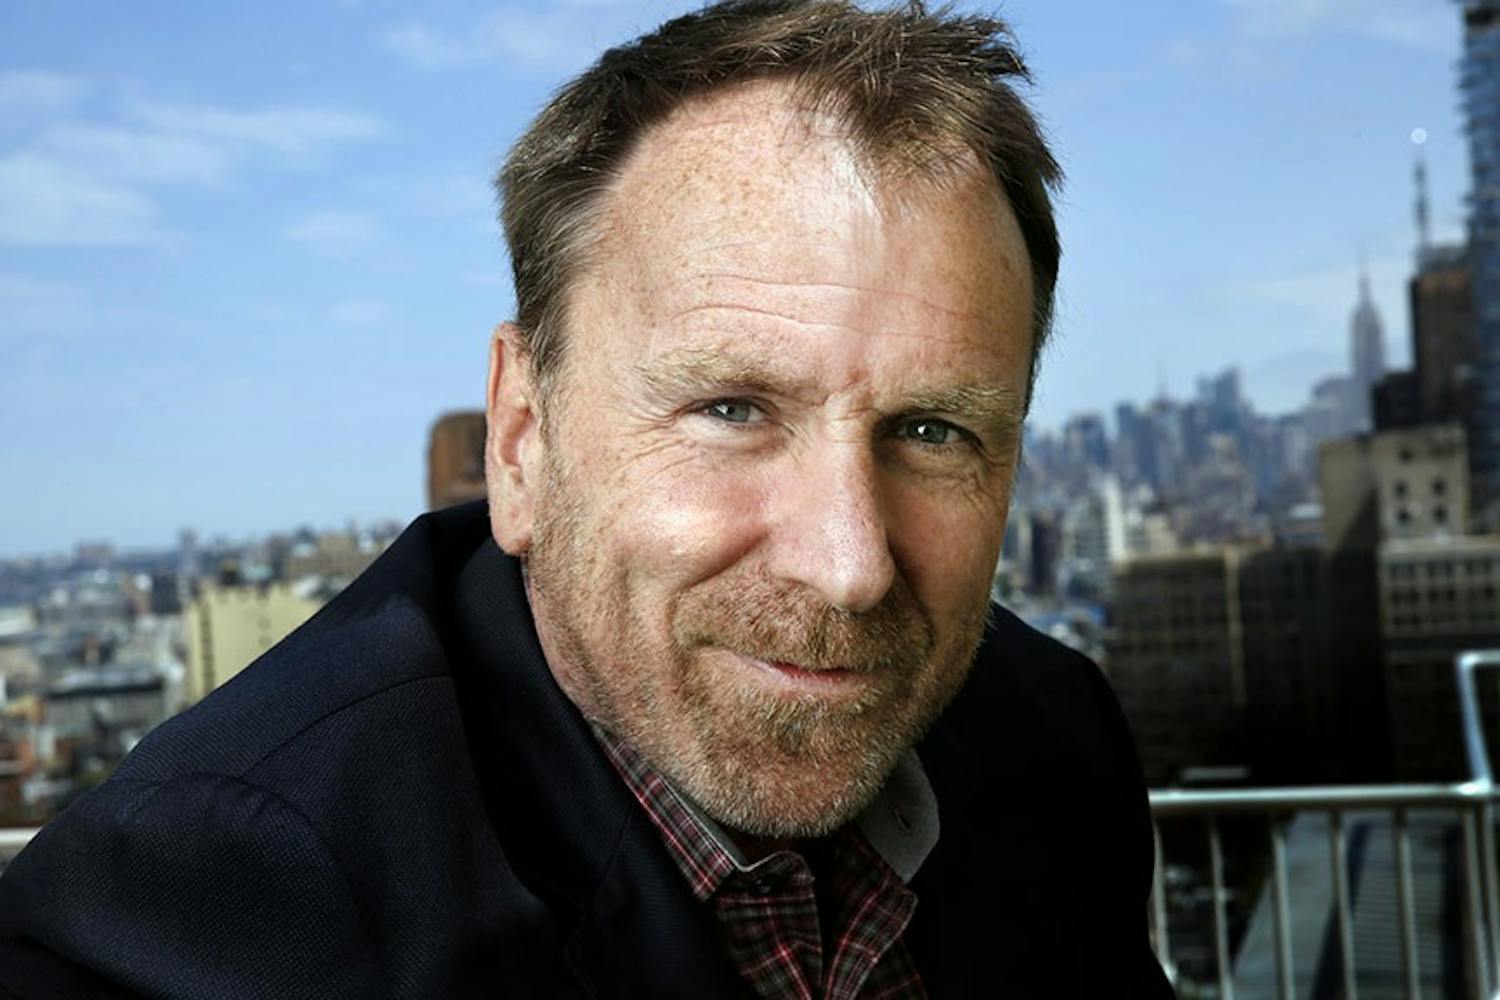 Stand-up comedian and former SNL writer and cast member Colin Quinn spoke with The Spectrum in promotion of his “One in Every Crowd” stand-up tour, the comedians first in seven years.